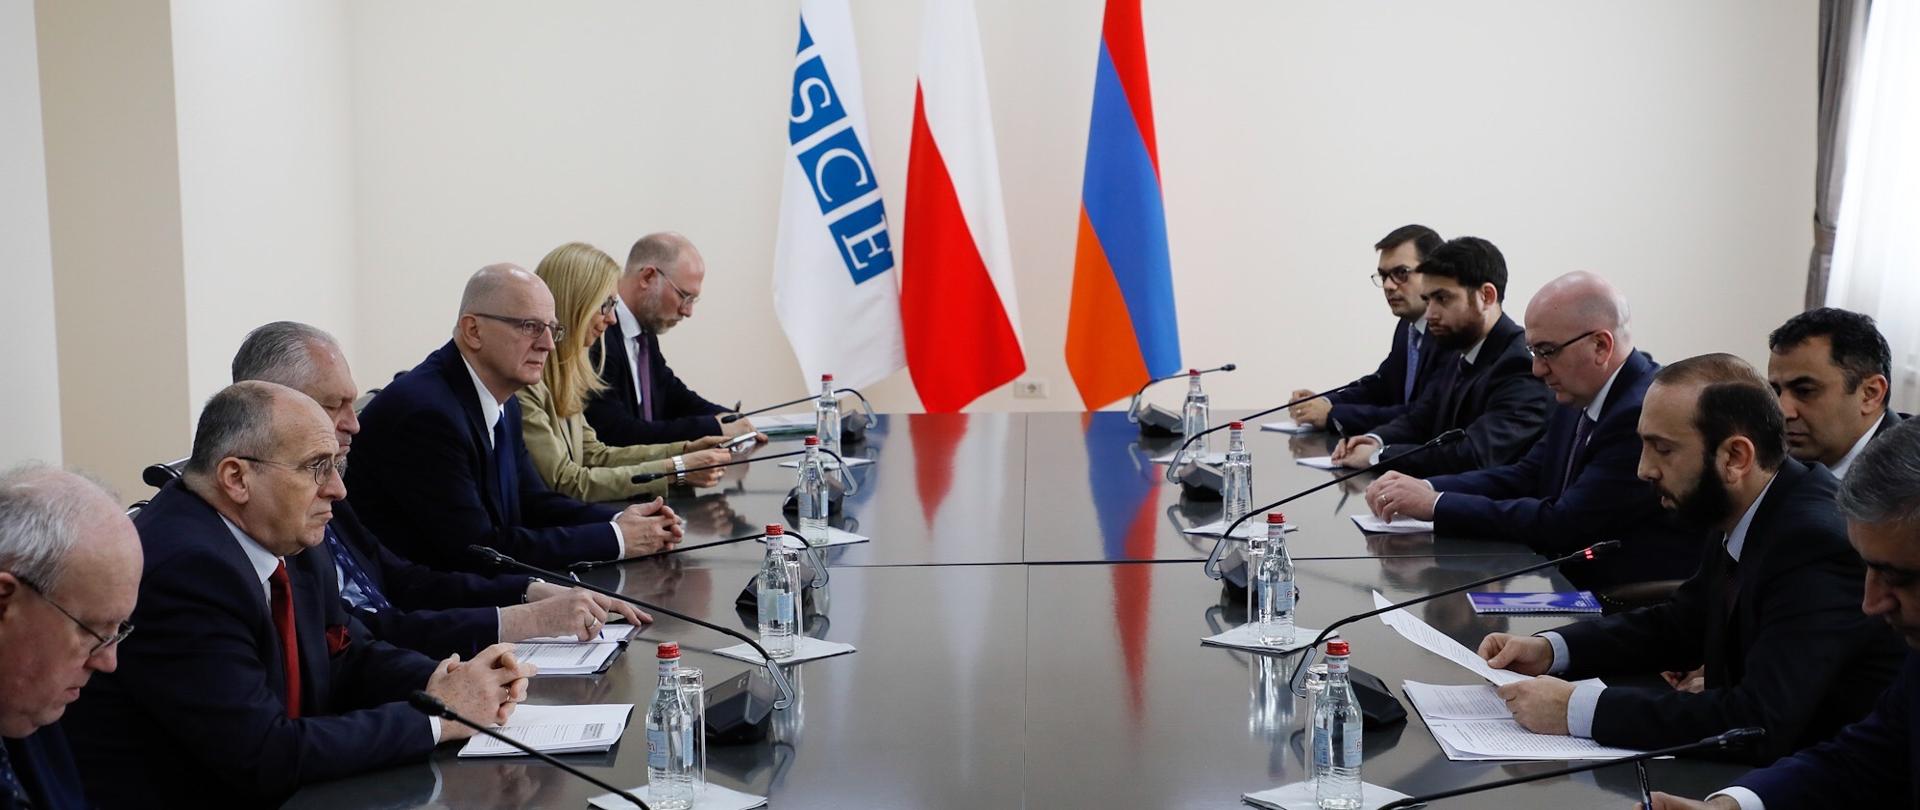 Minister Zbigniew Rau as the OSCE Chairman-in-Office visited Armenia